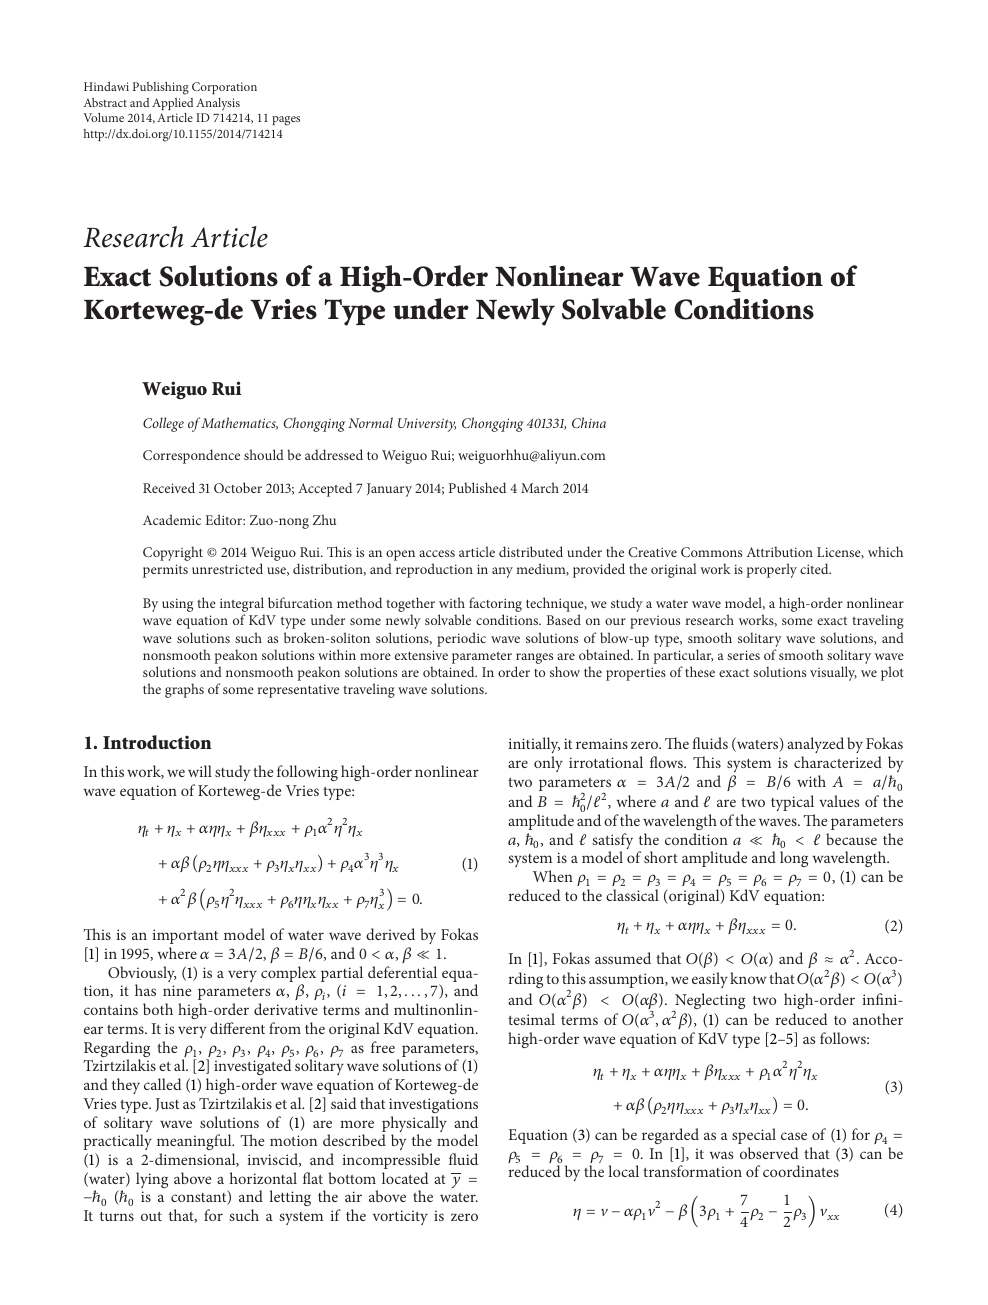 Exact Solutions Of A High Order Nonlinear Wave Equation Of Korteweg De Vries Type Under Newly Solvable Conditions Topic Of Research Paper In Mathematics Download Scholarly Article Pdf And Read For Free On